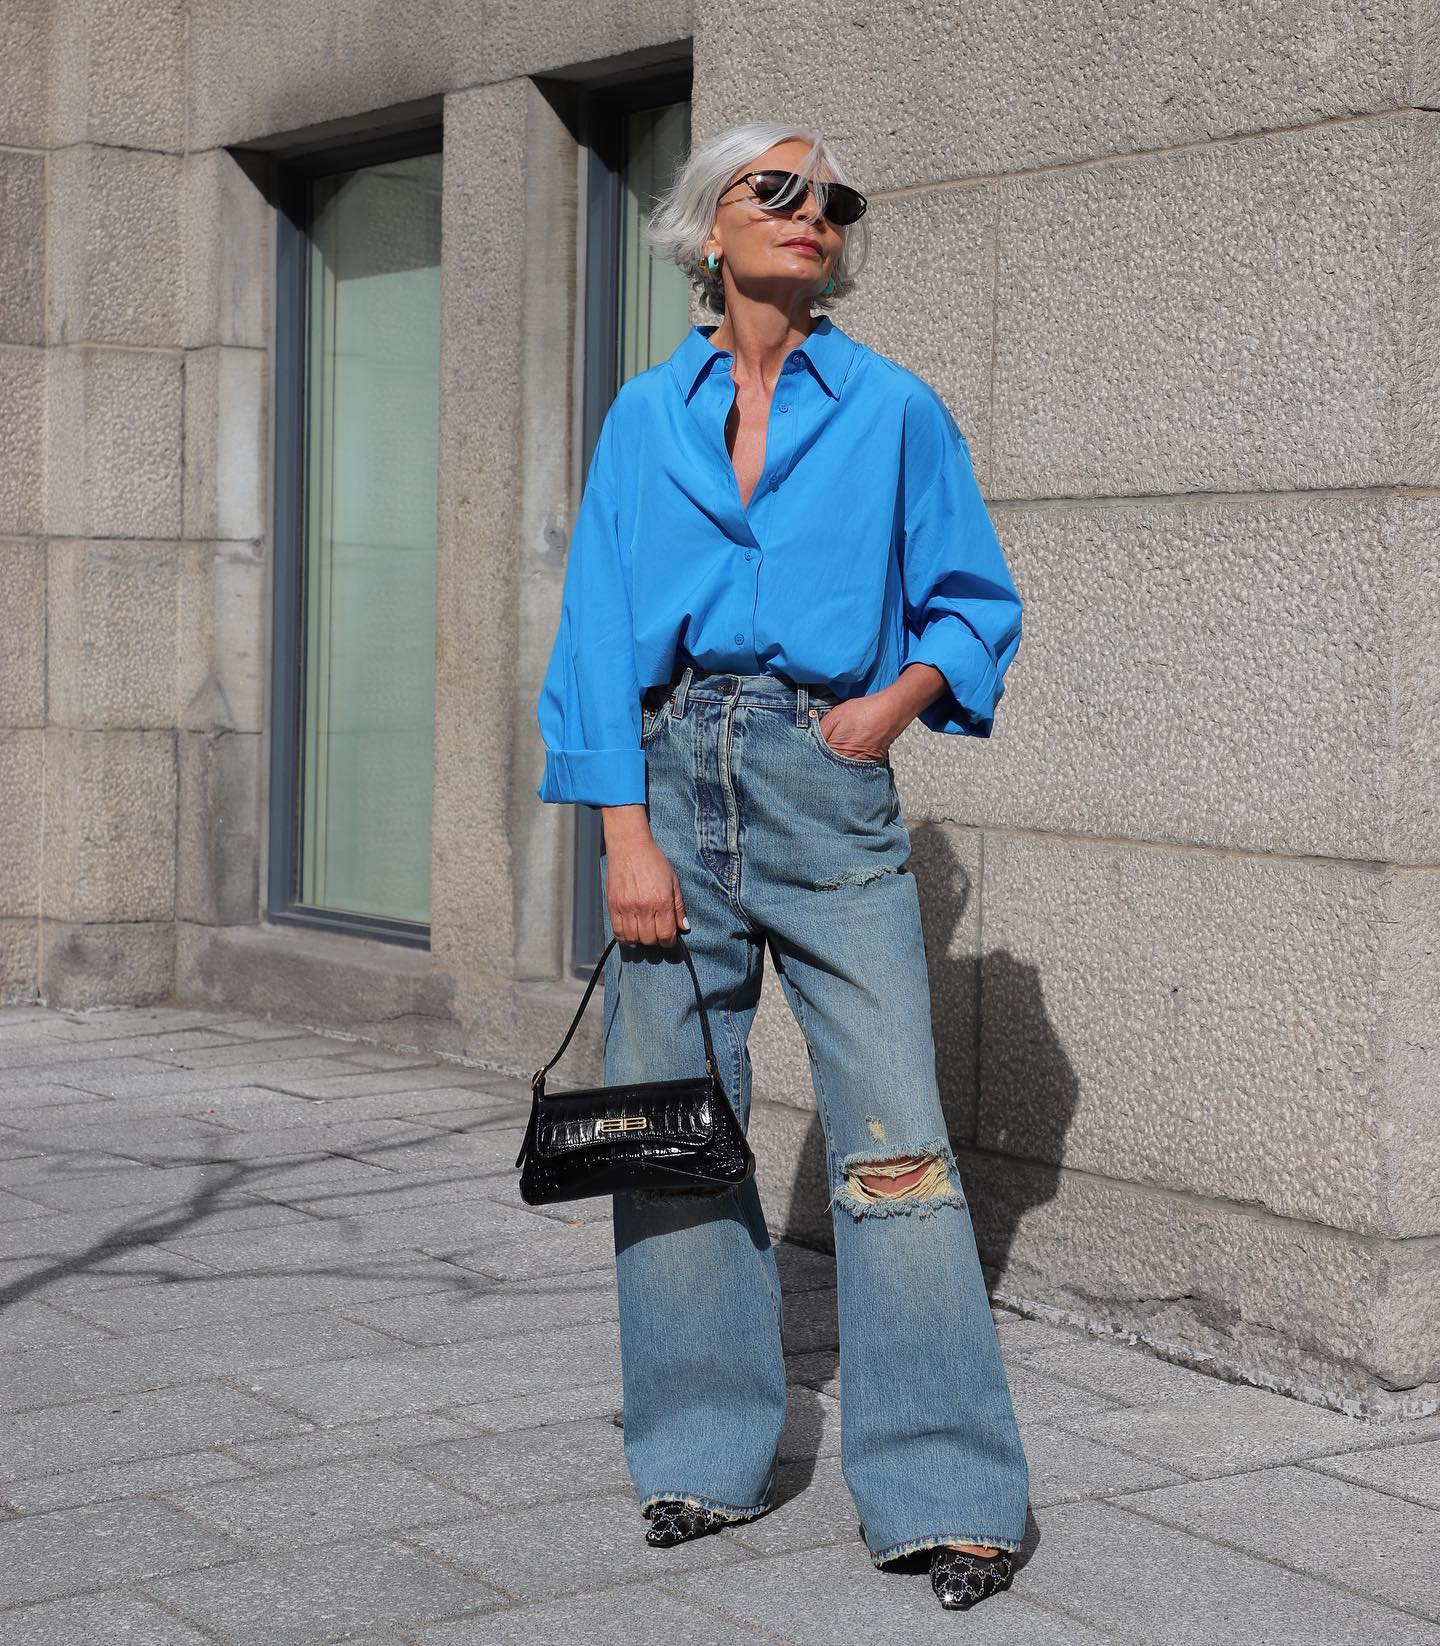 6 Fashion Staples Chic Women Over 50 Have in Their Closets | Who What Wear